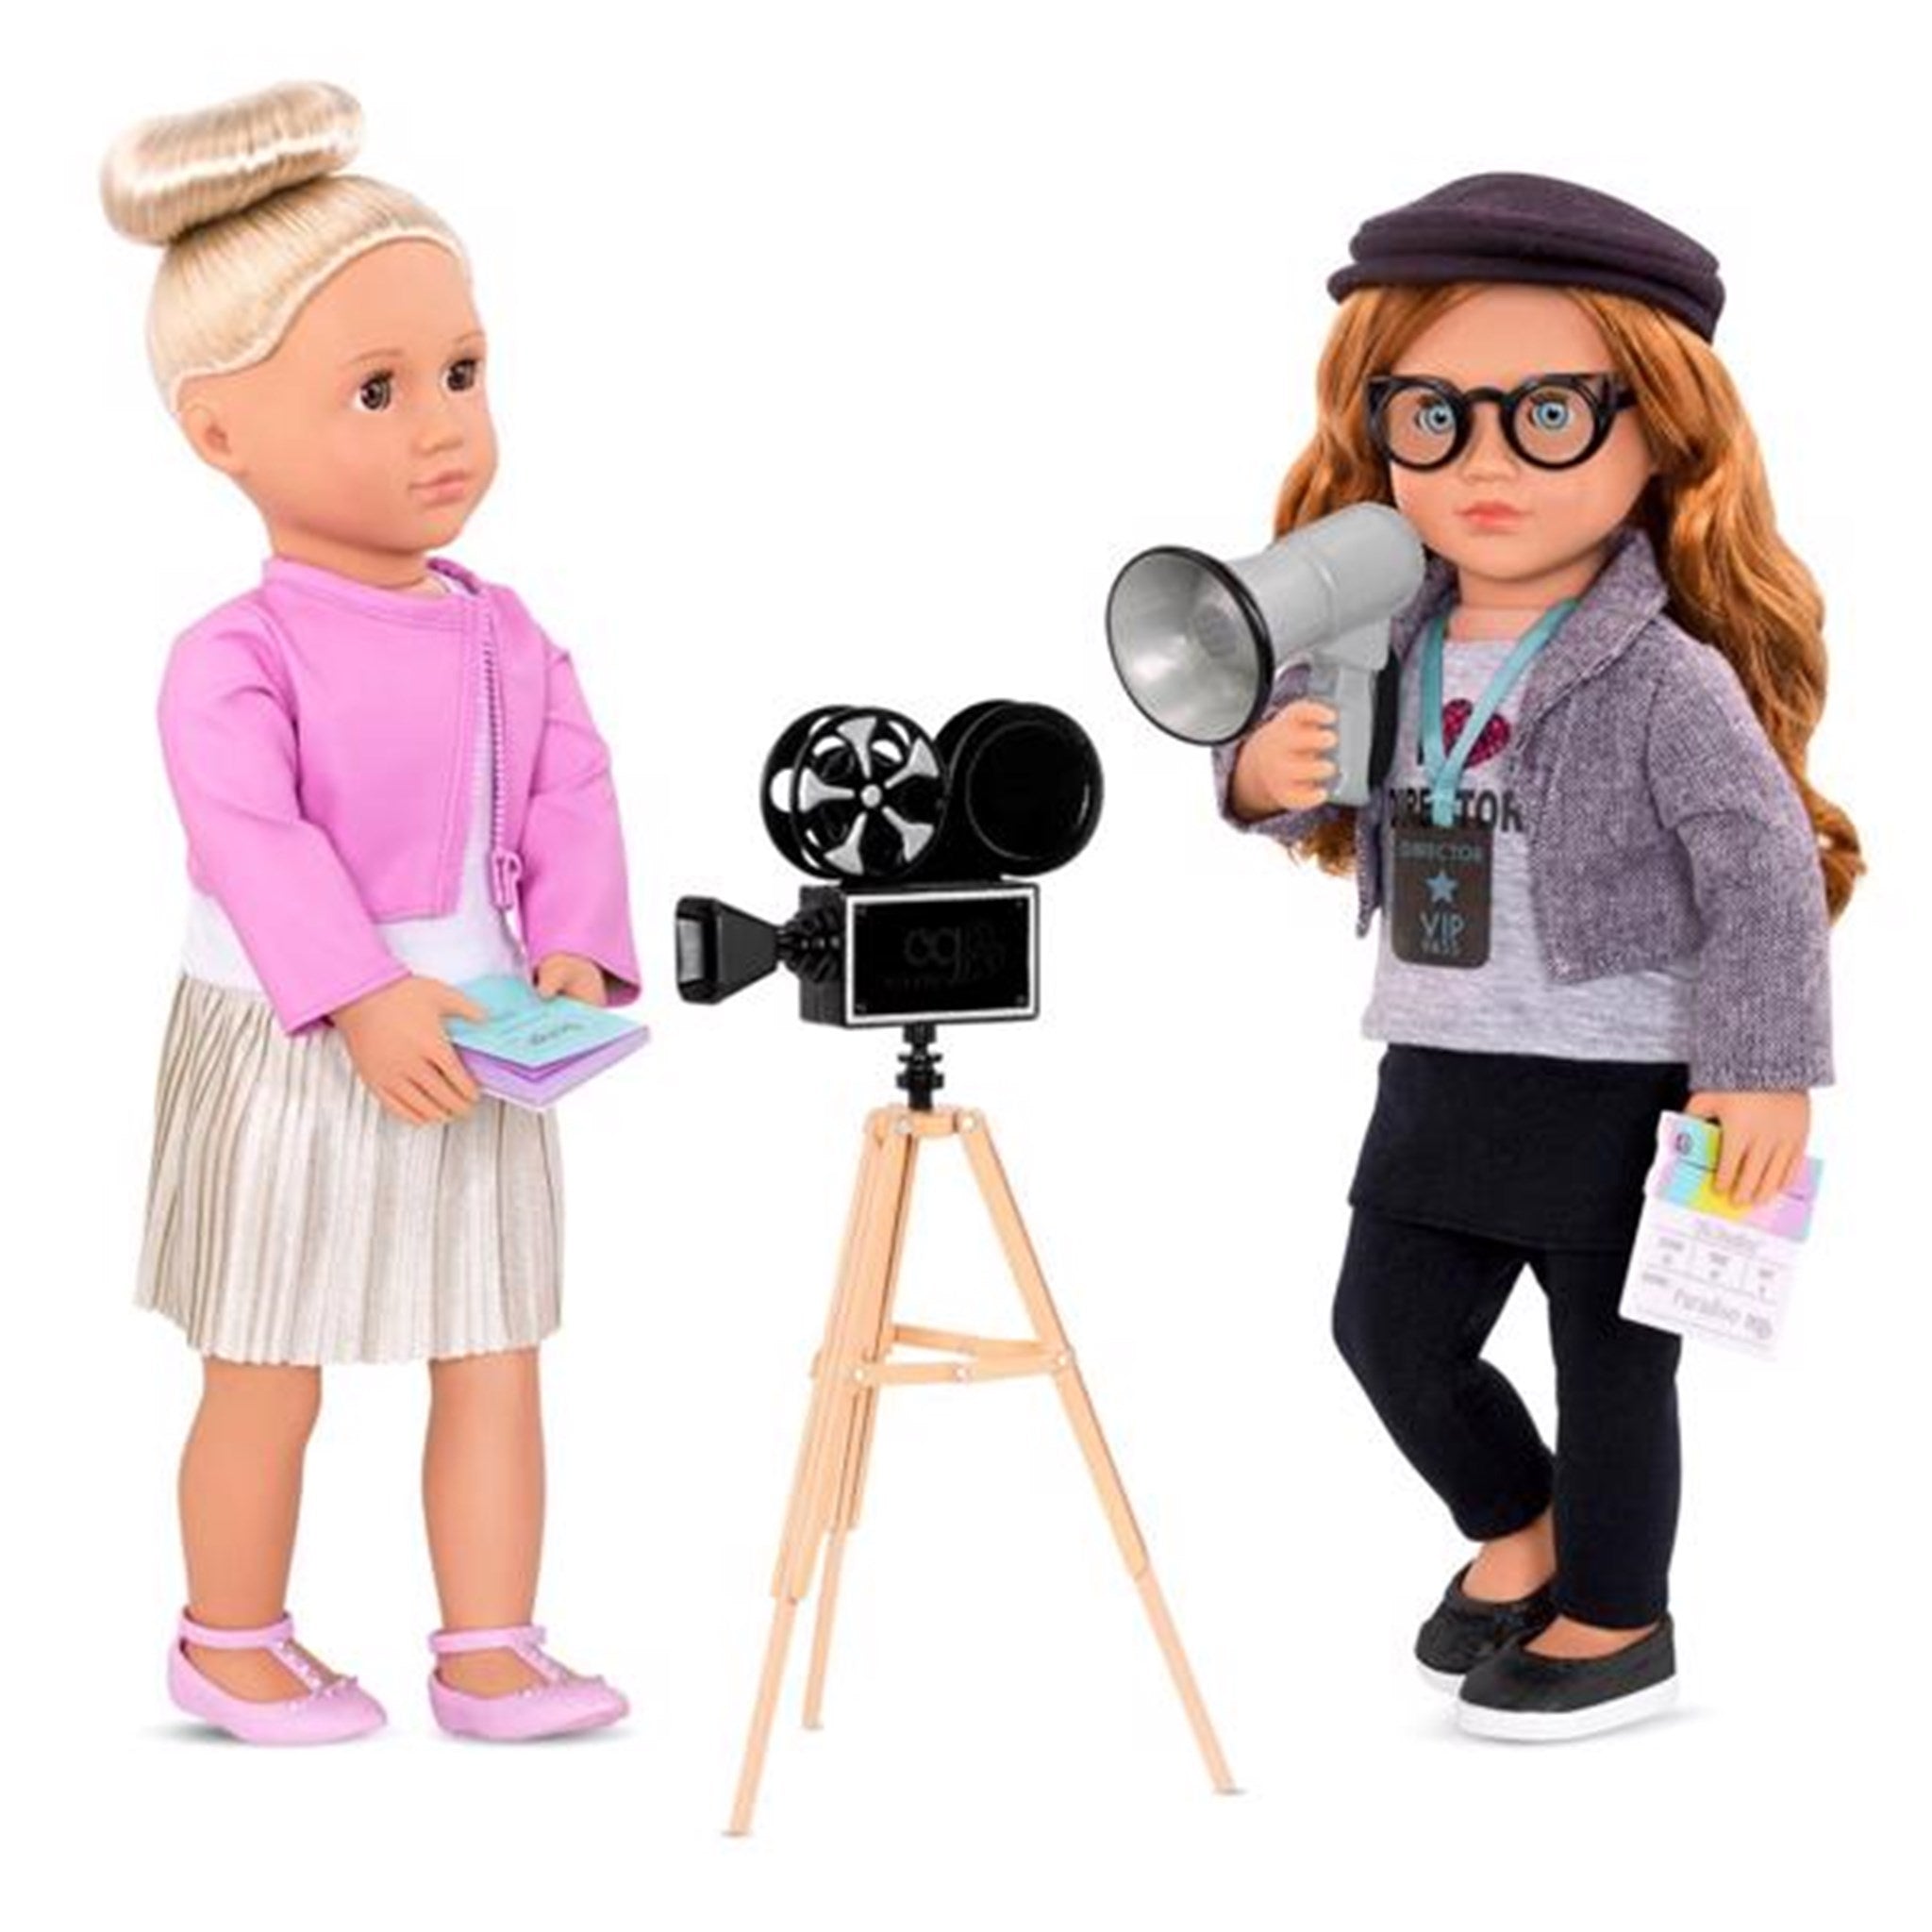 Our Generation Doll Accessories - Movie Production 2